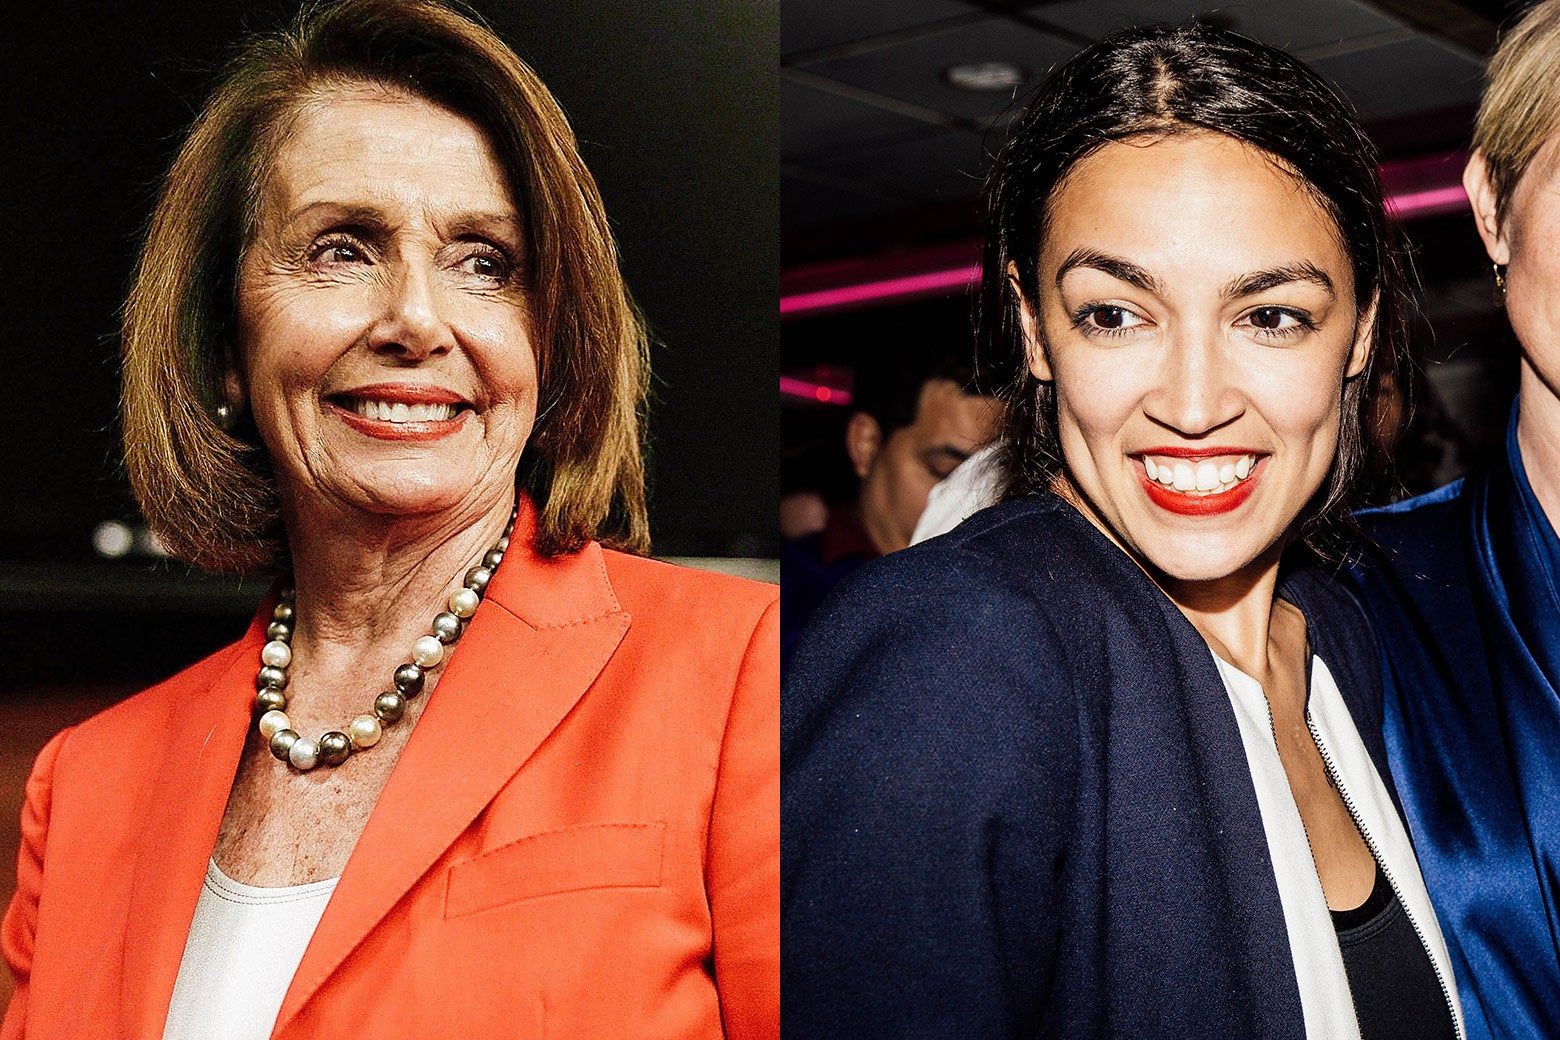 Side by side images of Pelosi and Ocasio-Cortez.